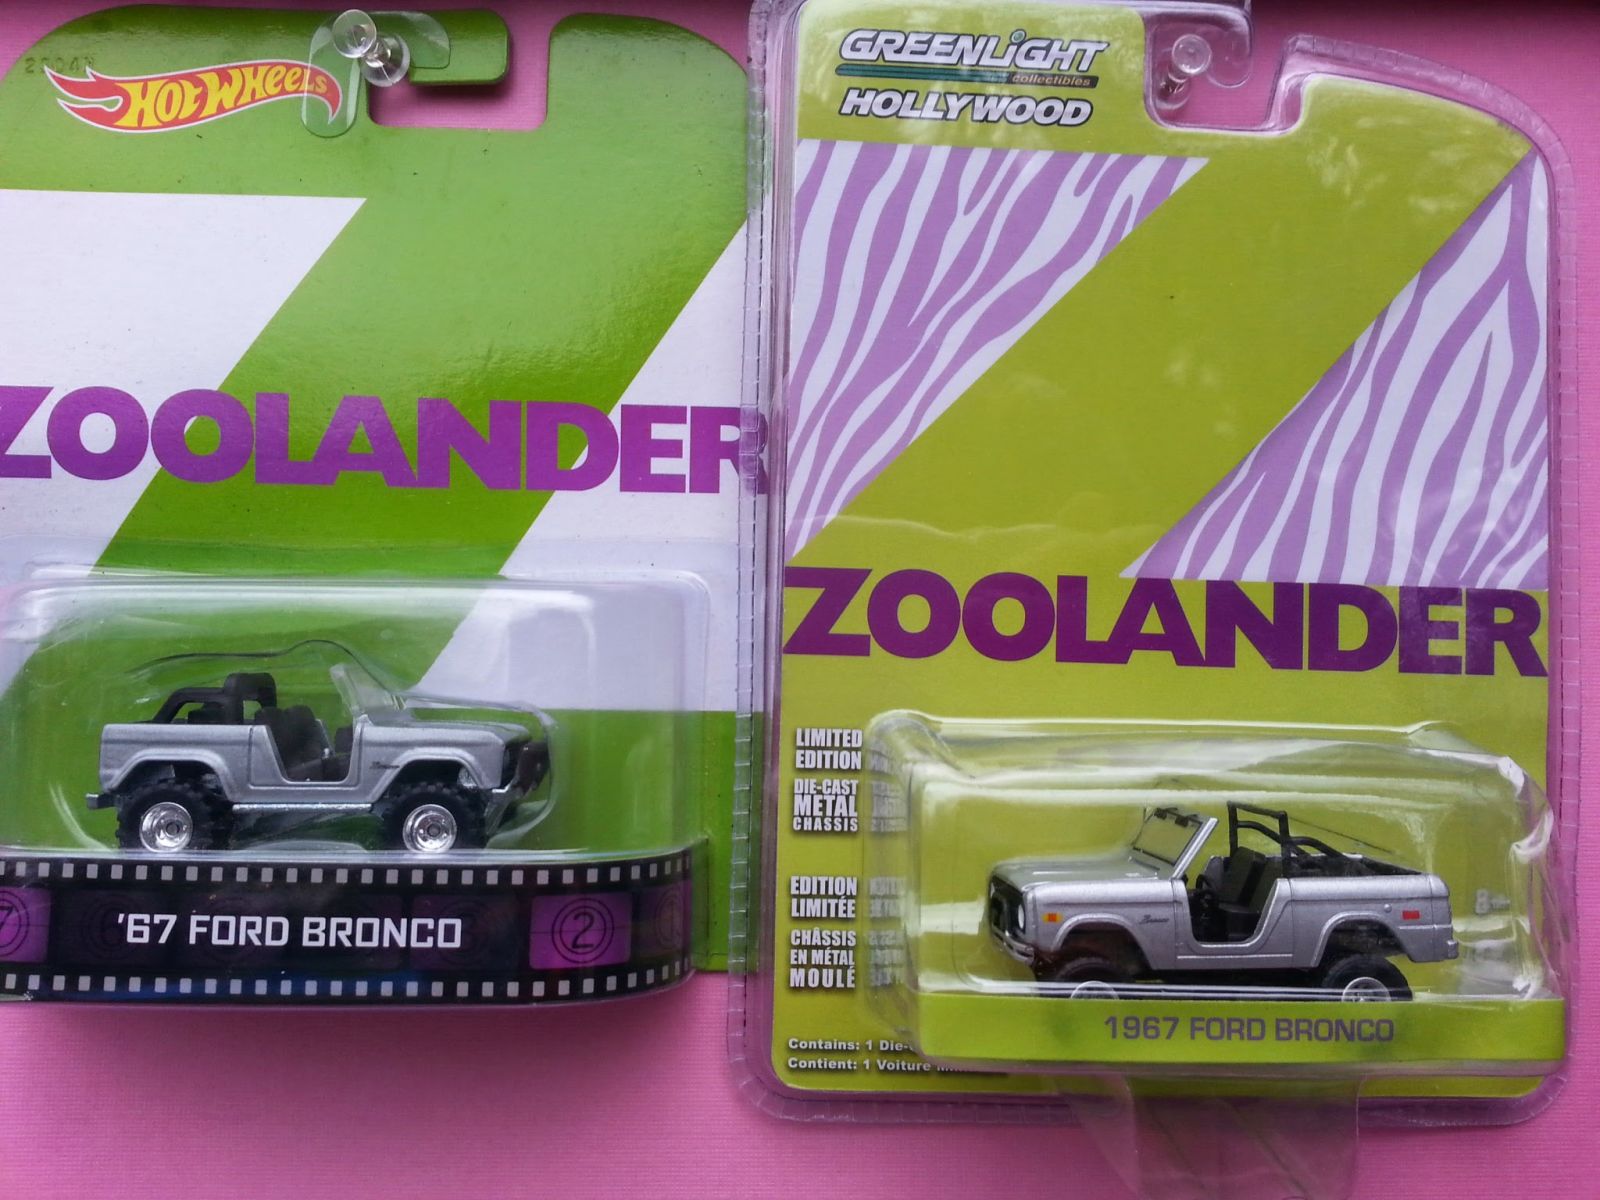 Illustration for article titled Hot Wheels vs Greenlight: The Zoolander Bronco [Comparison Review]